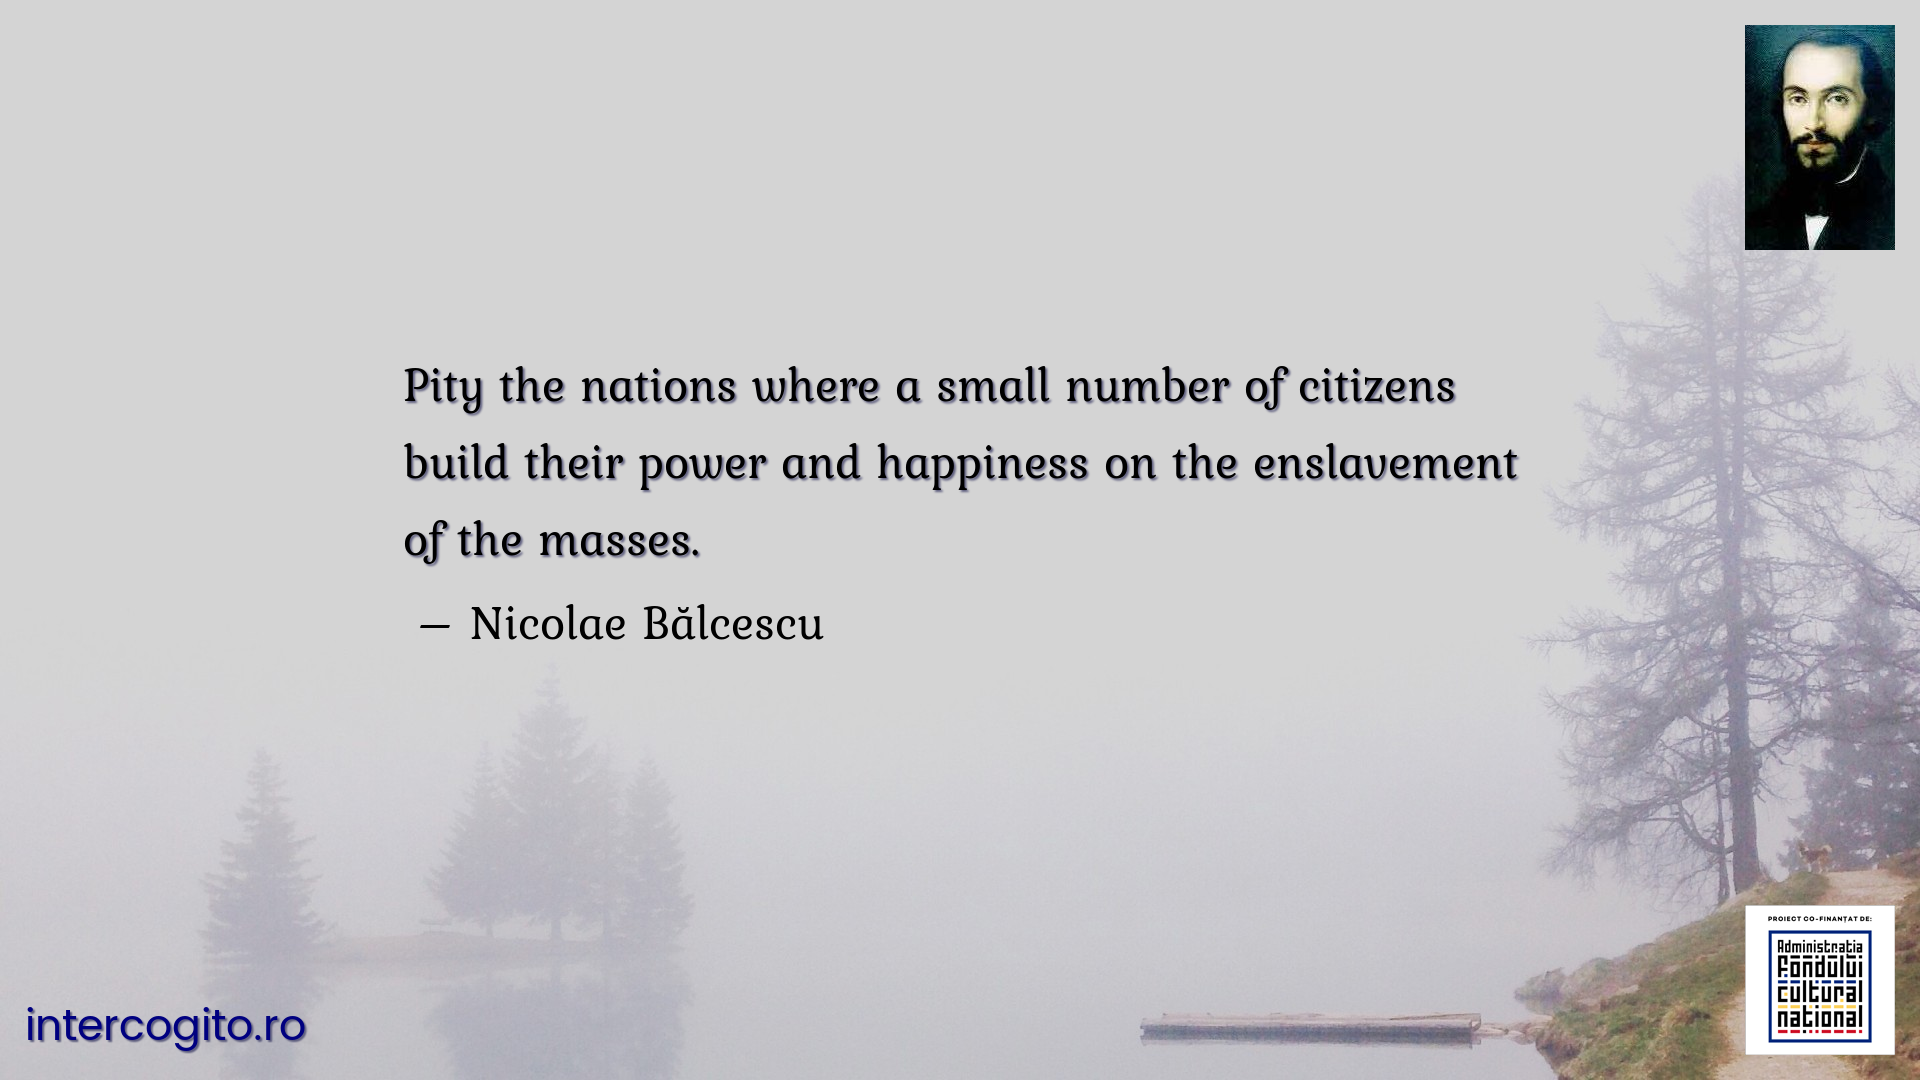 Pity the nations where a small number of citizens build their power and happiness on the enslavement of the masses.